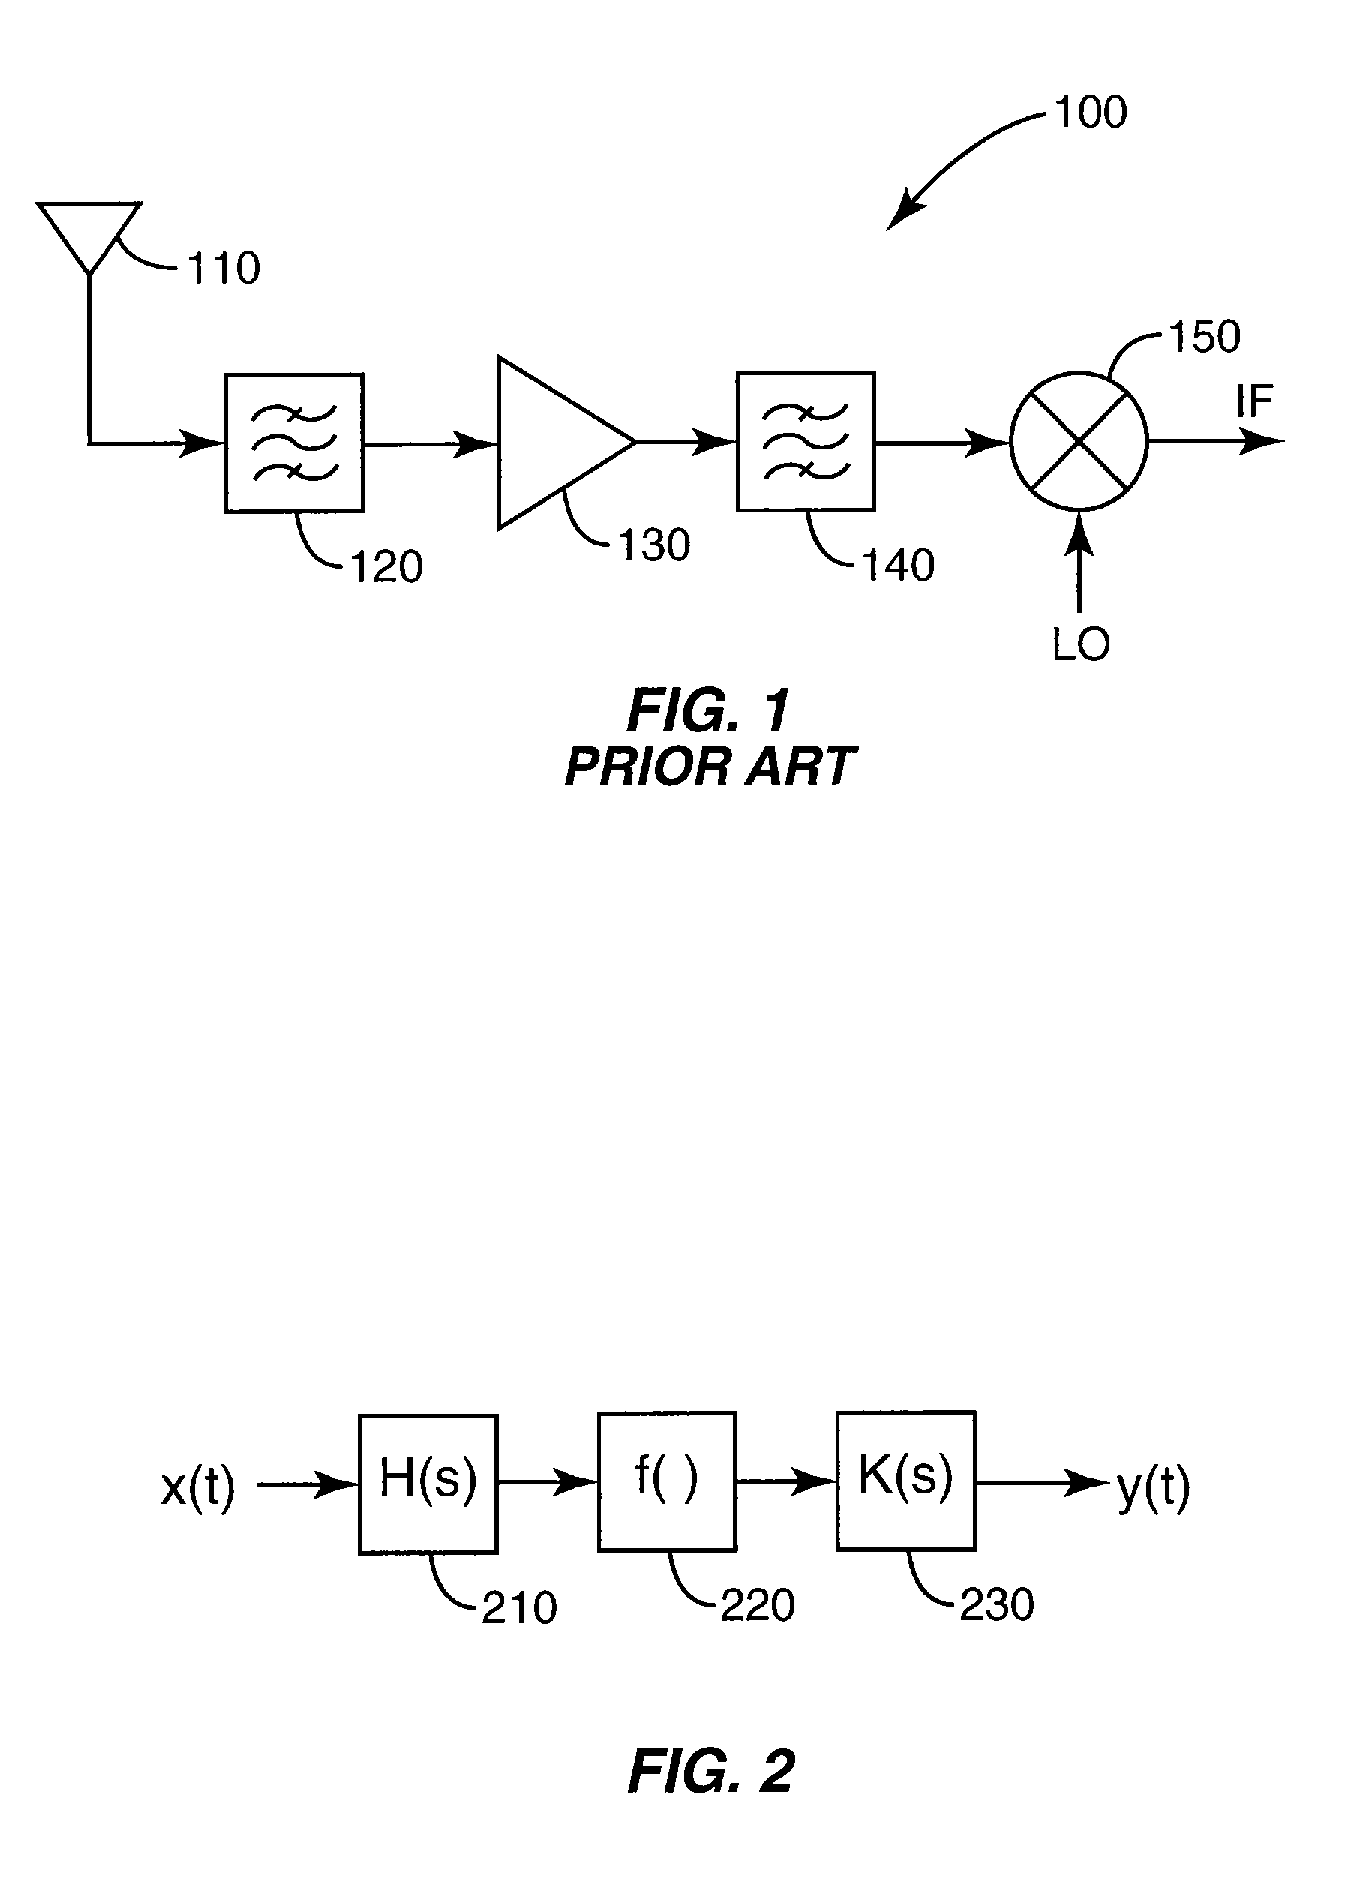 Method and apparatus for remote detection of radio-frequency devices